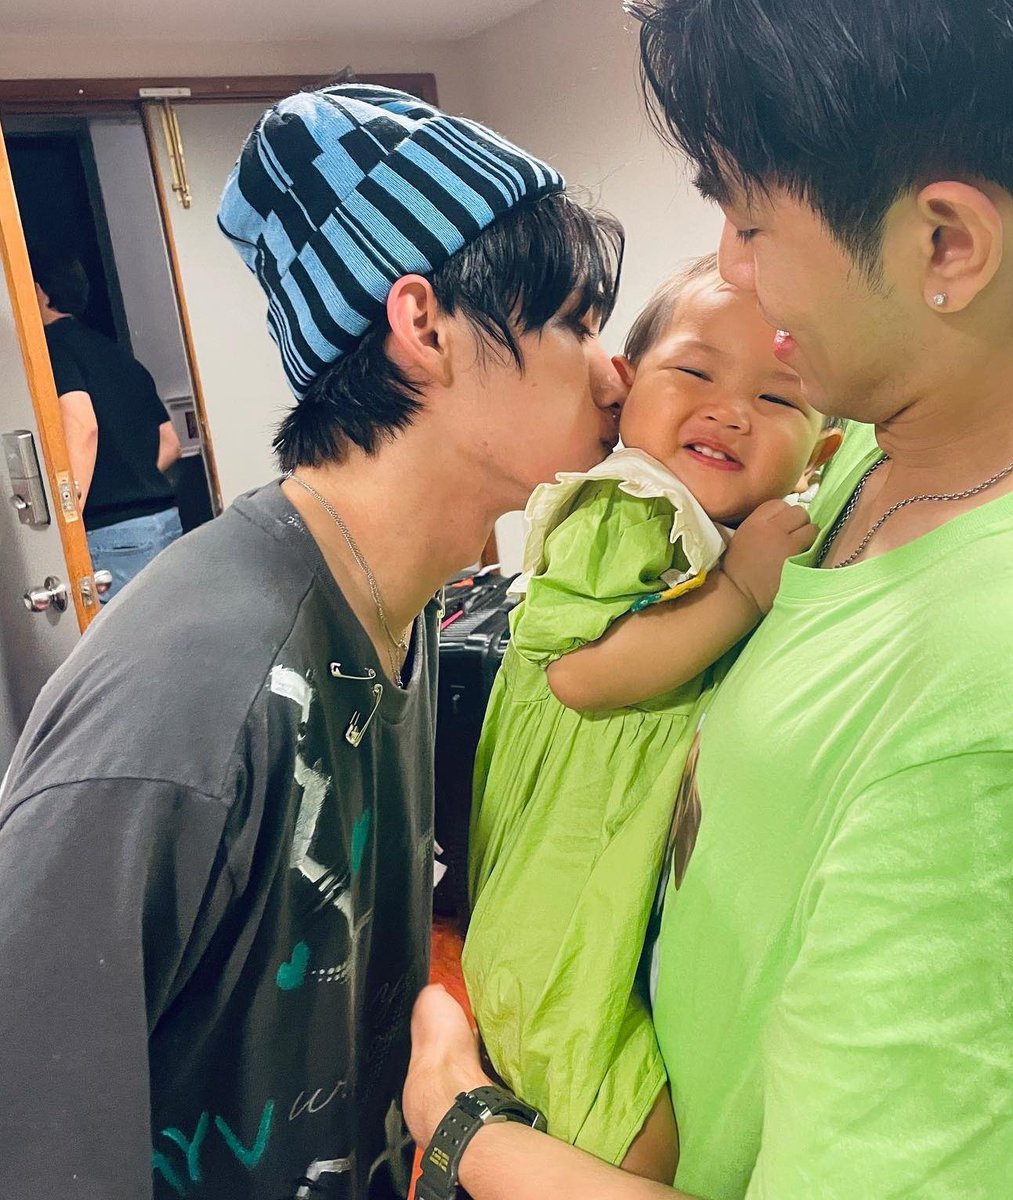 Uncle Xiaojun with his niece 🥺♥️
From this                             To this